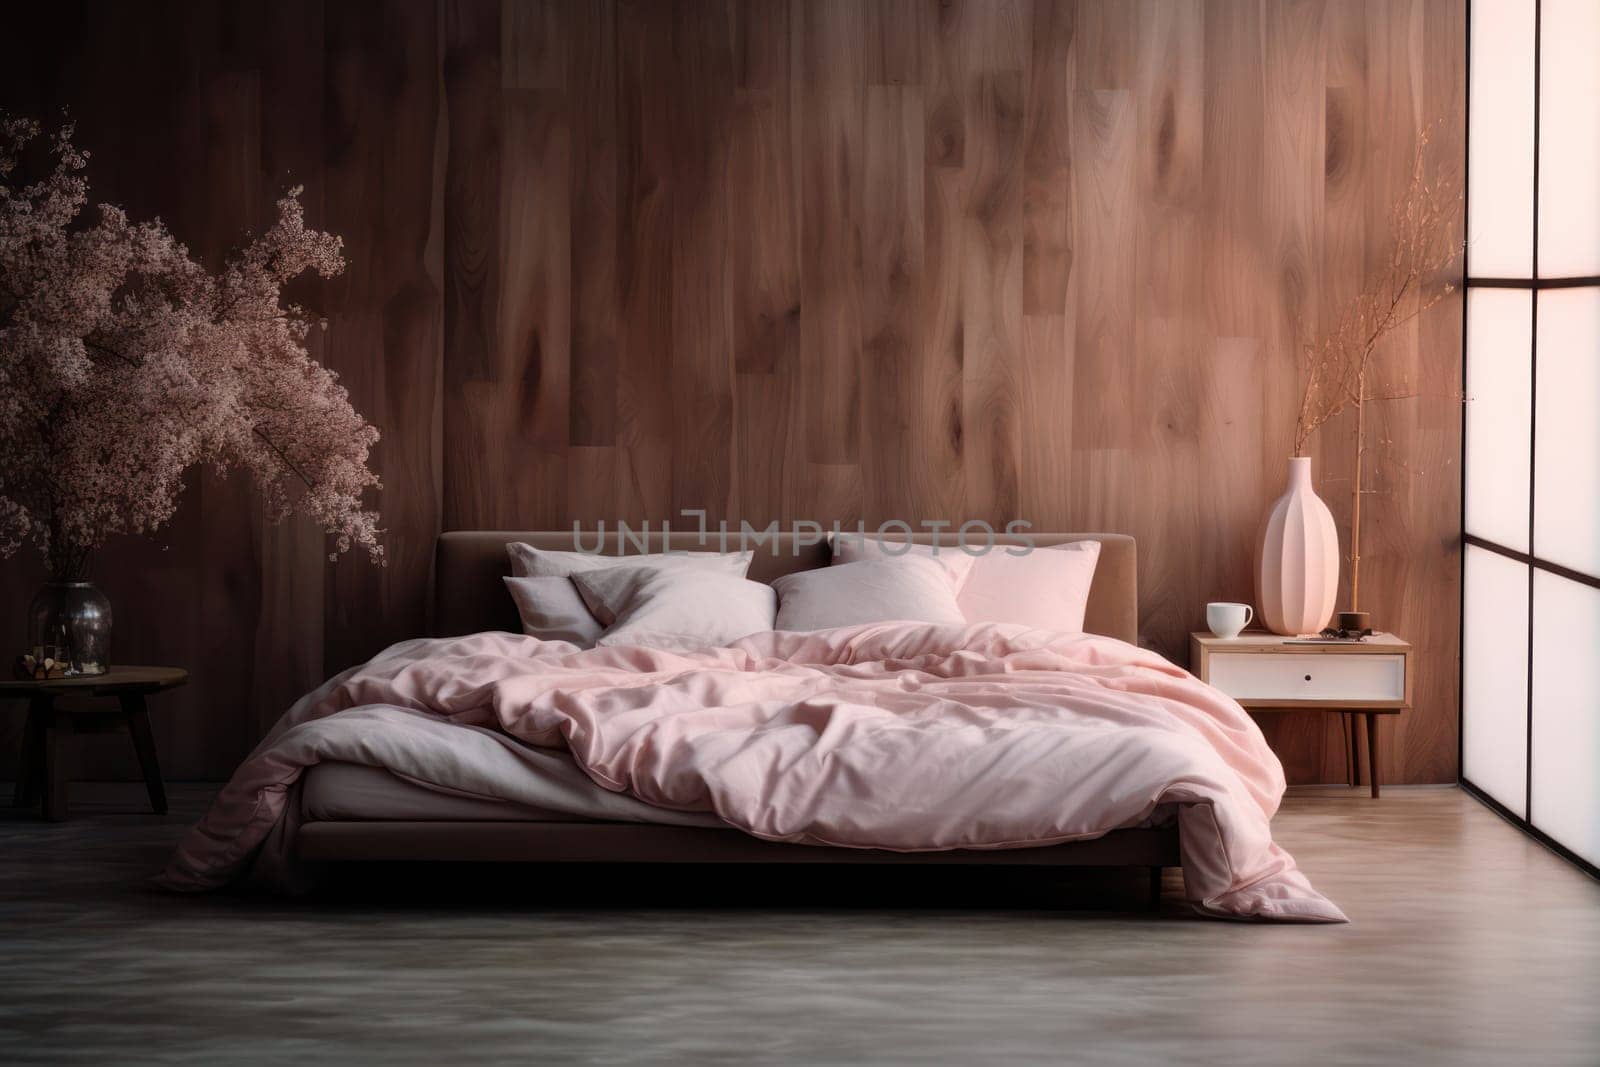 Modern Design: Cozy Bedroom with Stylish Furniture and Elegant Wood Wall Decor